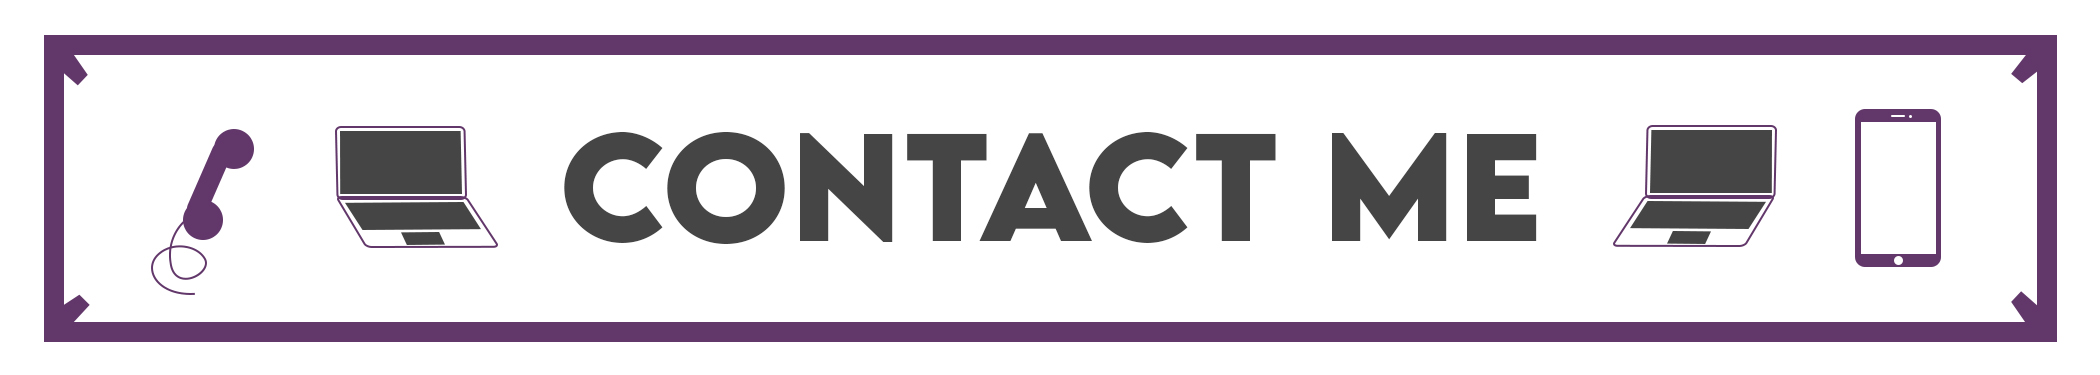 image of contact me banner